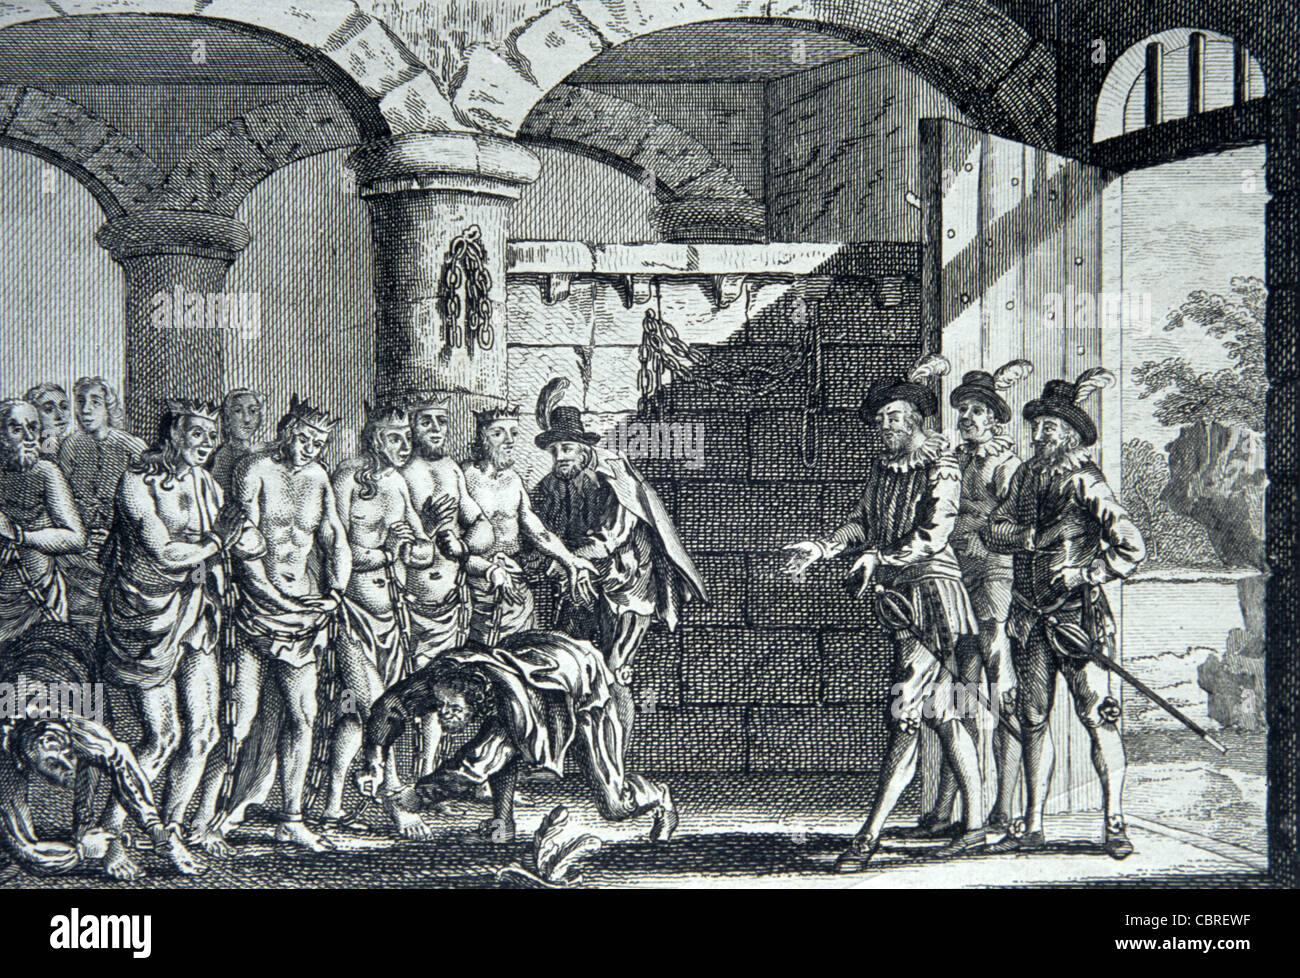 Francis Drake Releases Five Imprisoned Indian Chiefs in Central or South America (in conflict with Spanish), c18th Engraving or Vintage Illustration Stock Photo